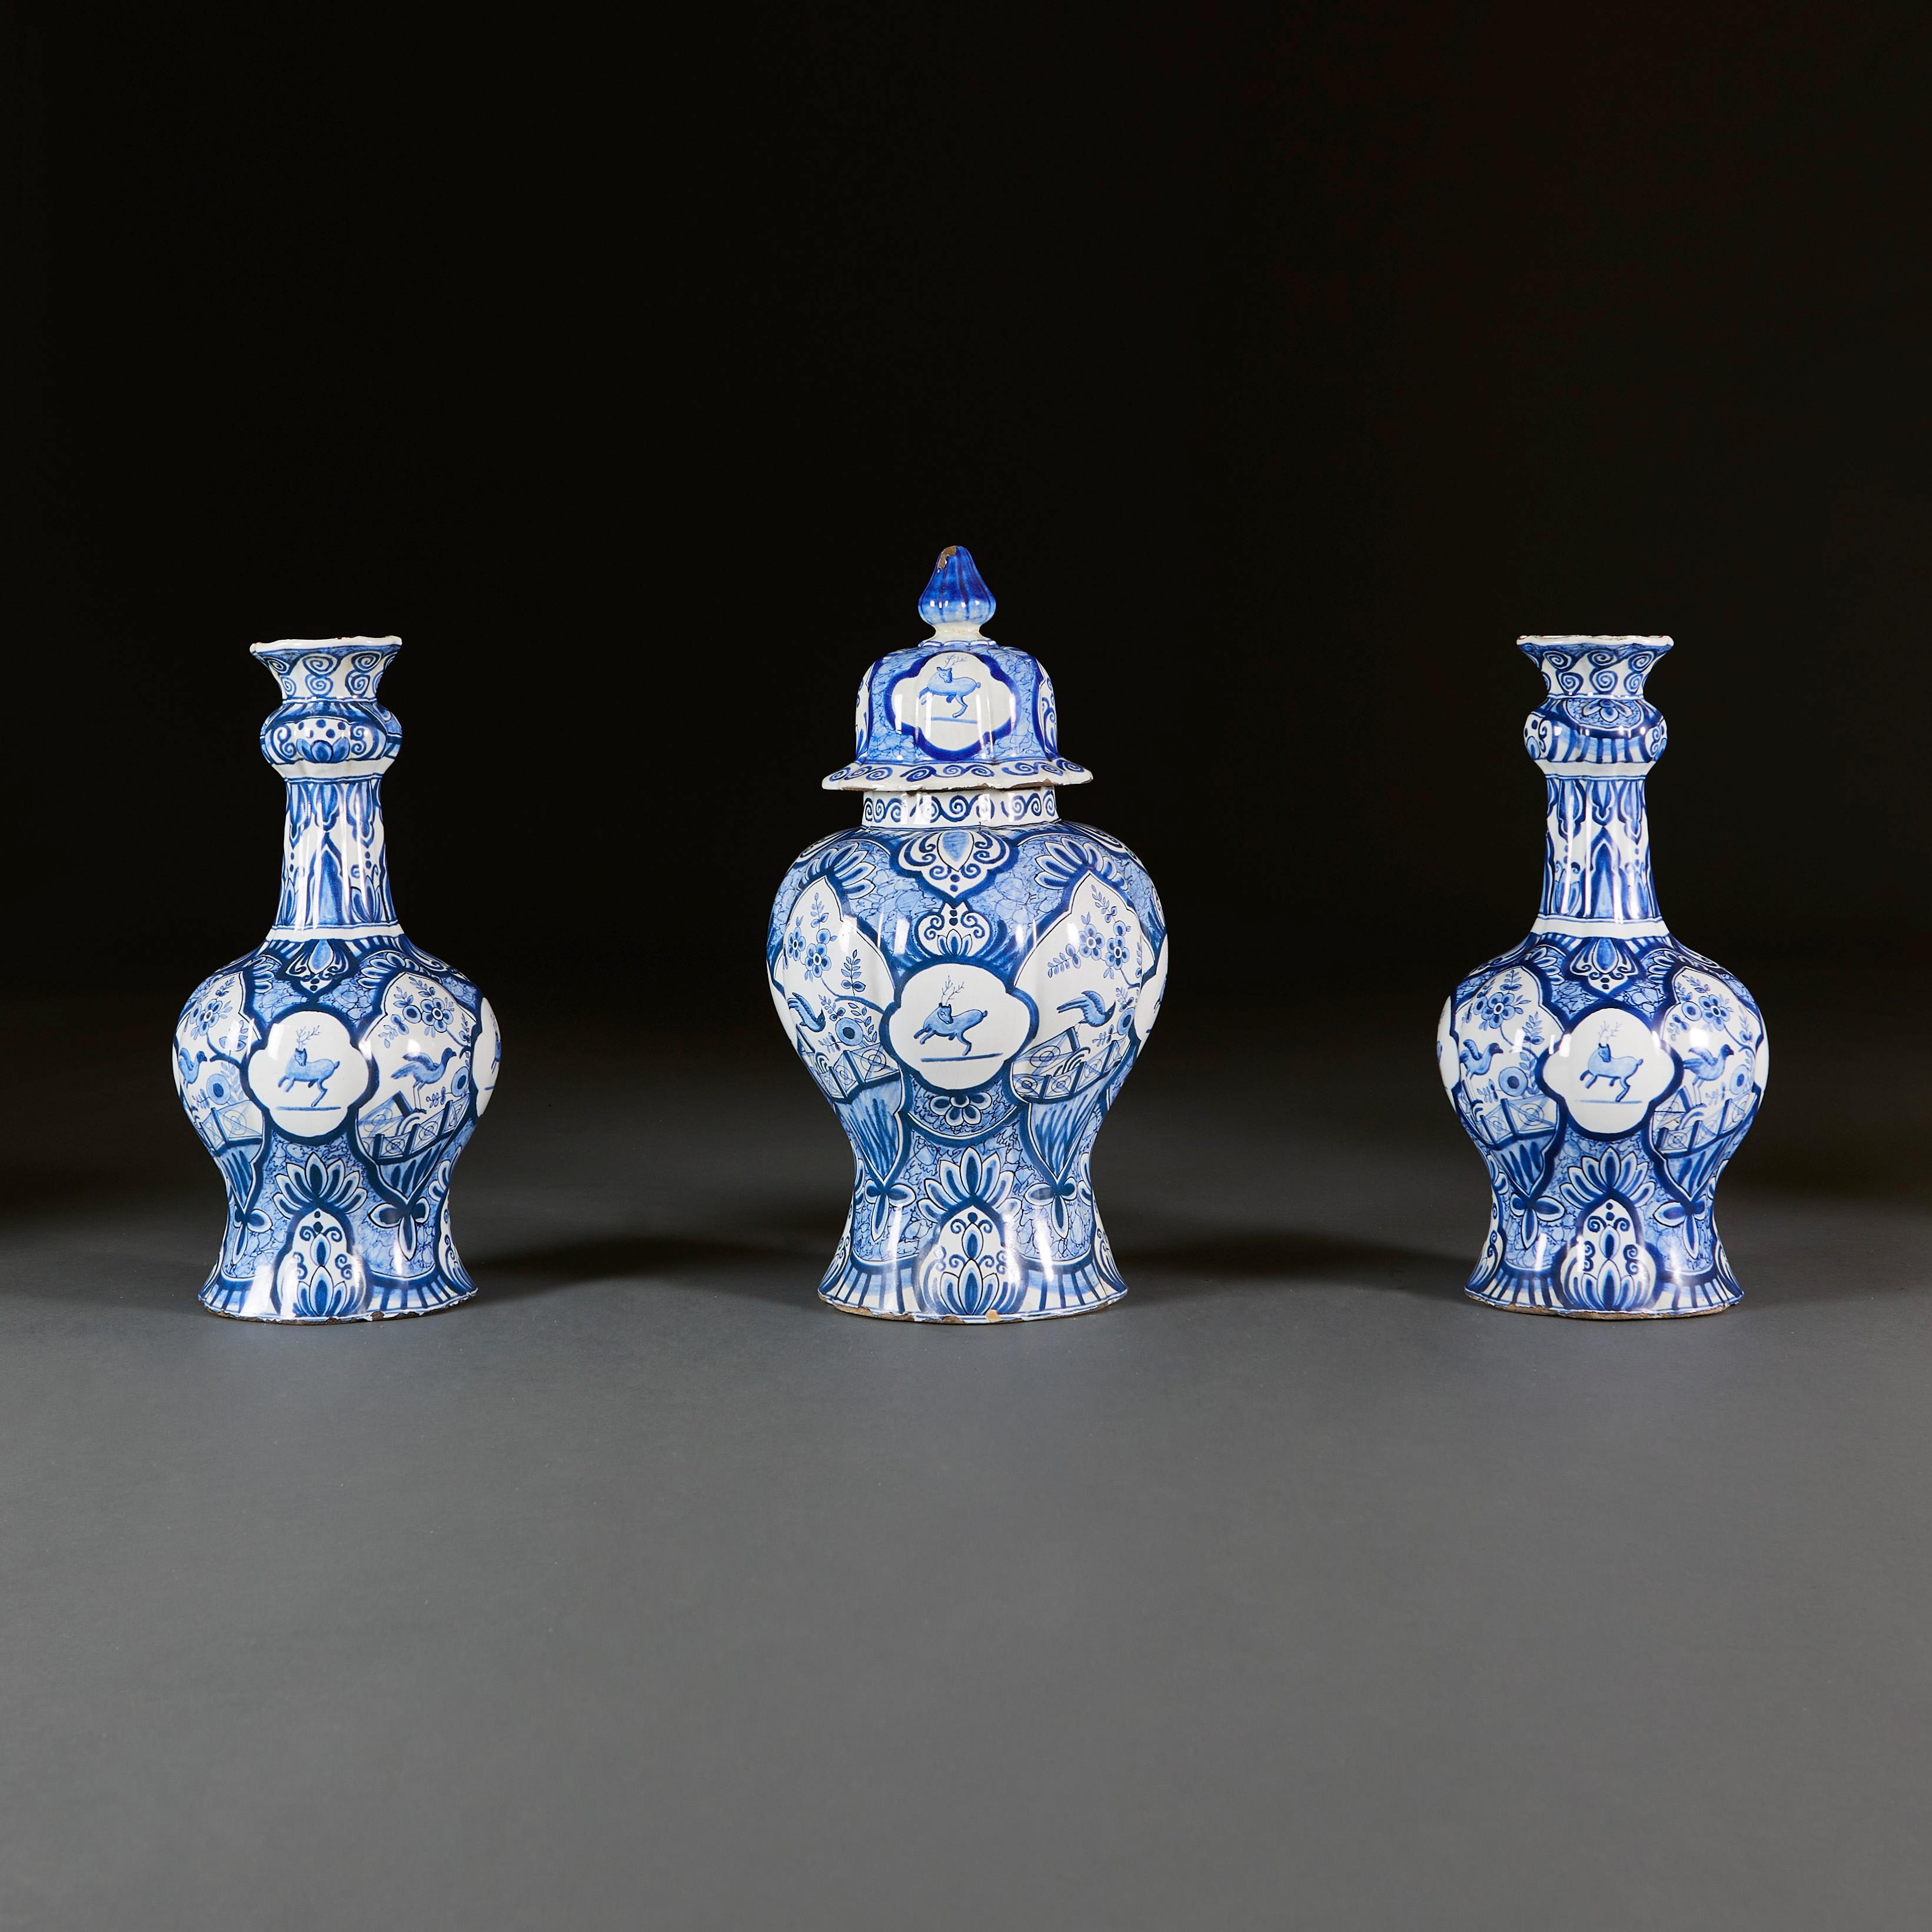 Low Countries, circa 1890.

A fine three piece garniture of blue and white Delft vases, comprising a large pot and cover, with two octagonal bottle vases with flared necks, each with cartouches showing leaping dear and oriental birds, with